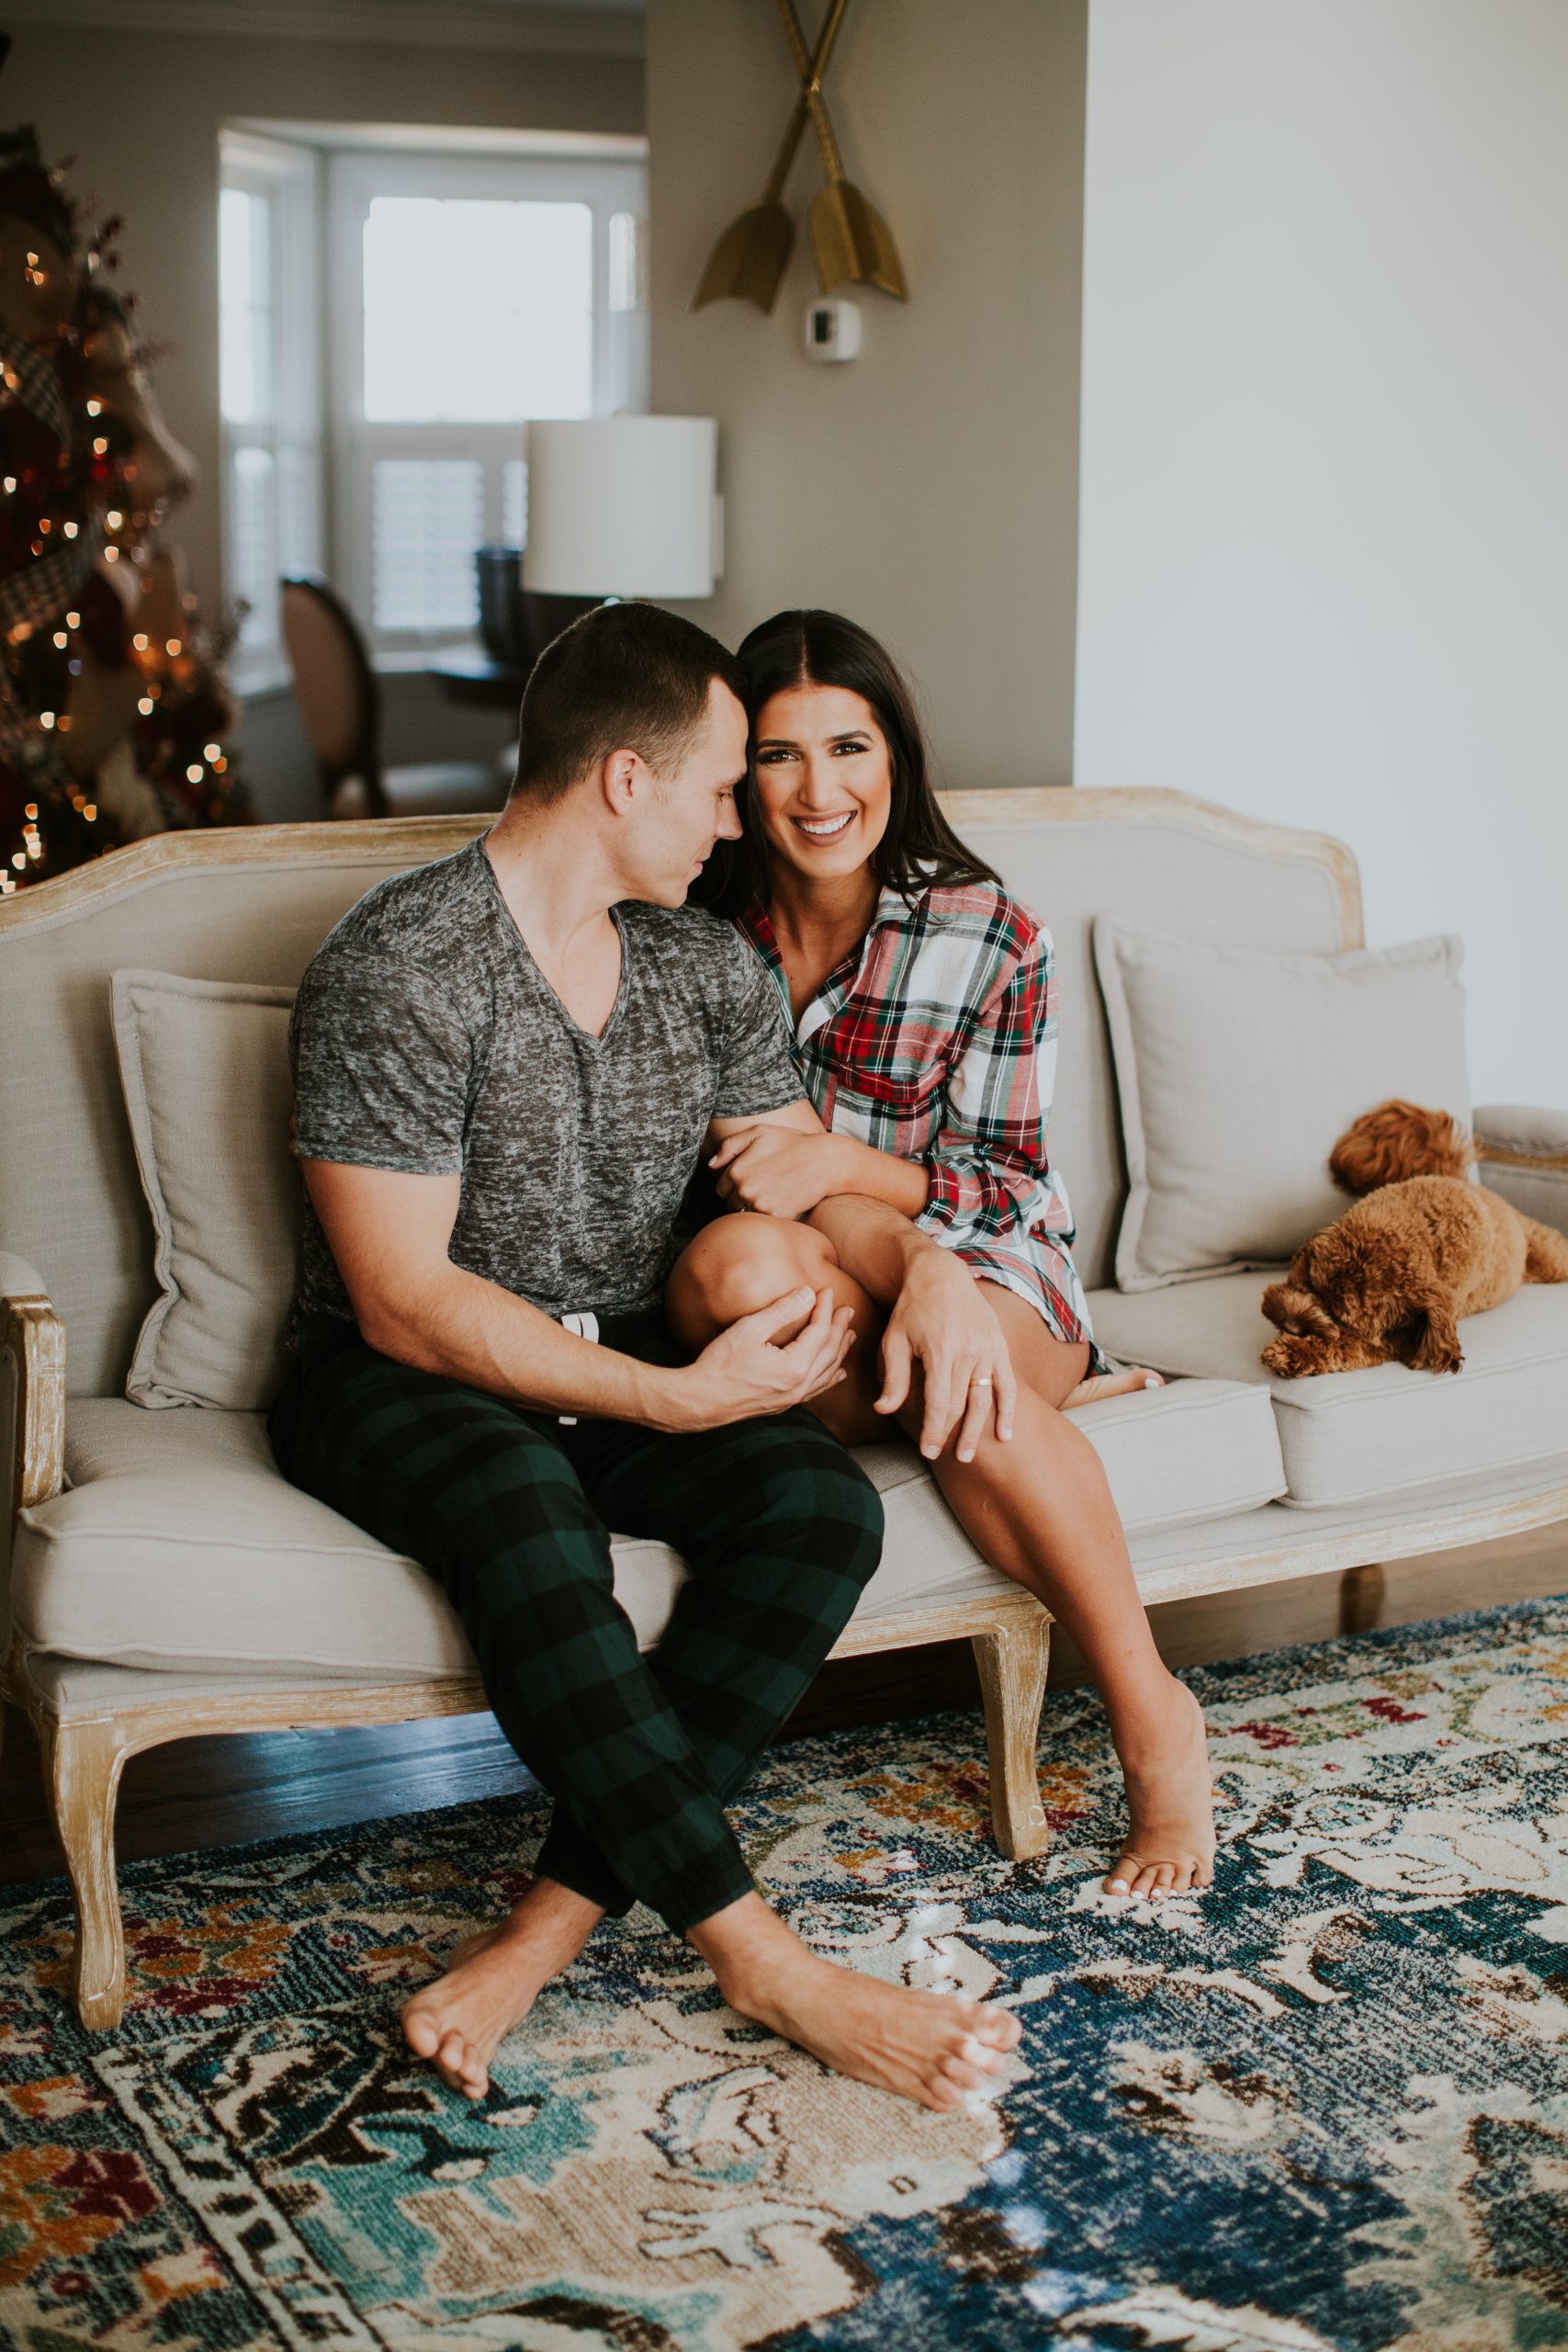 our holiday traditions, holiday pajamas, couples photos, christmas couples session, holiday couples outfit, cockapoo, a southern drawl dog, cocker spaniel poodle // grace white a southern drawl